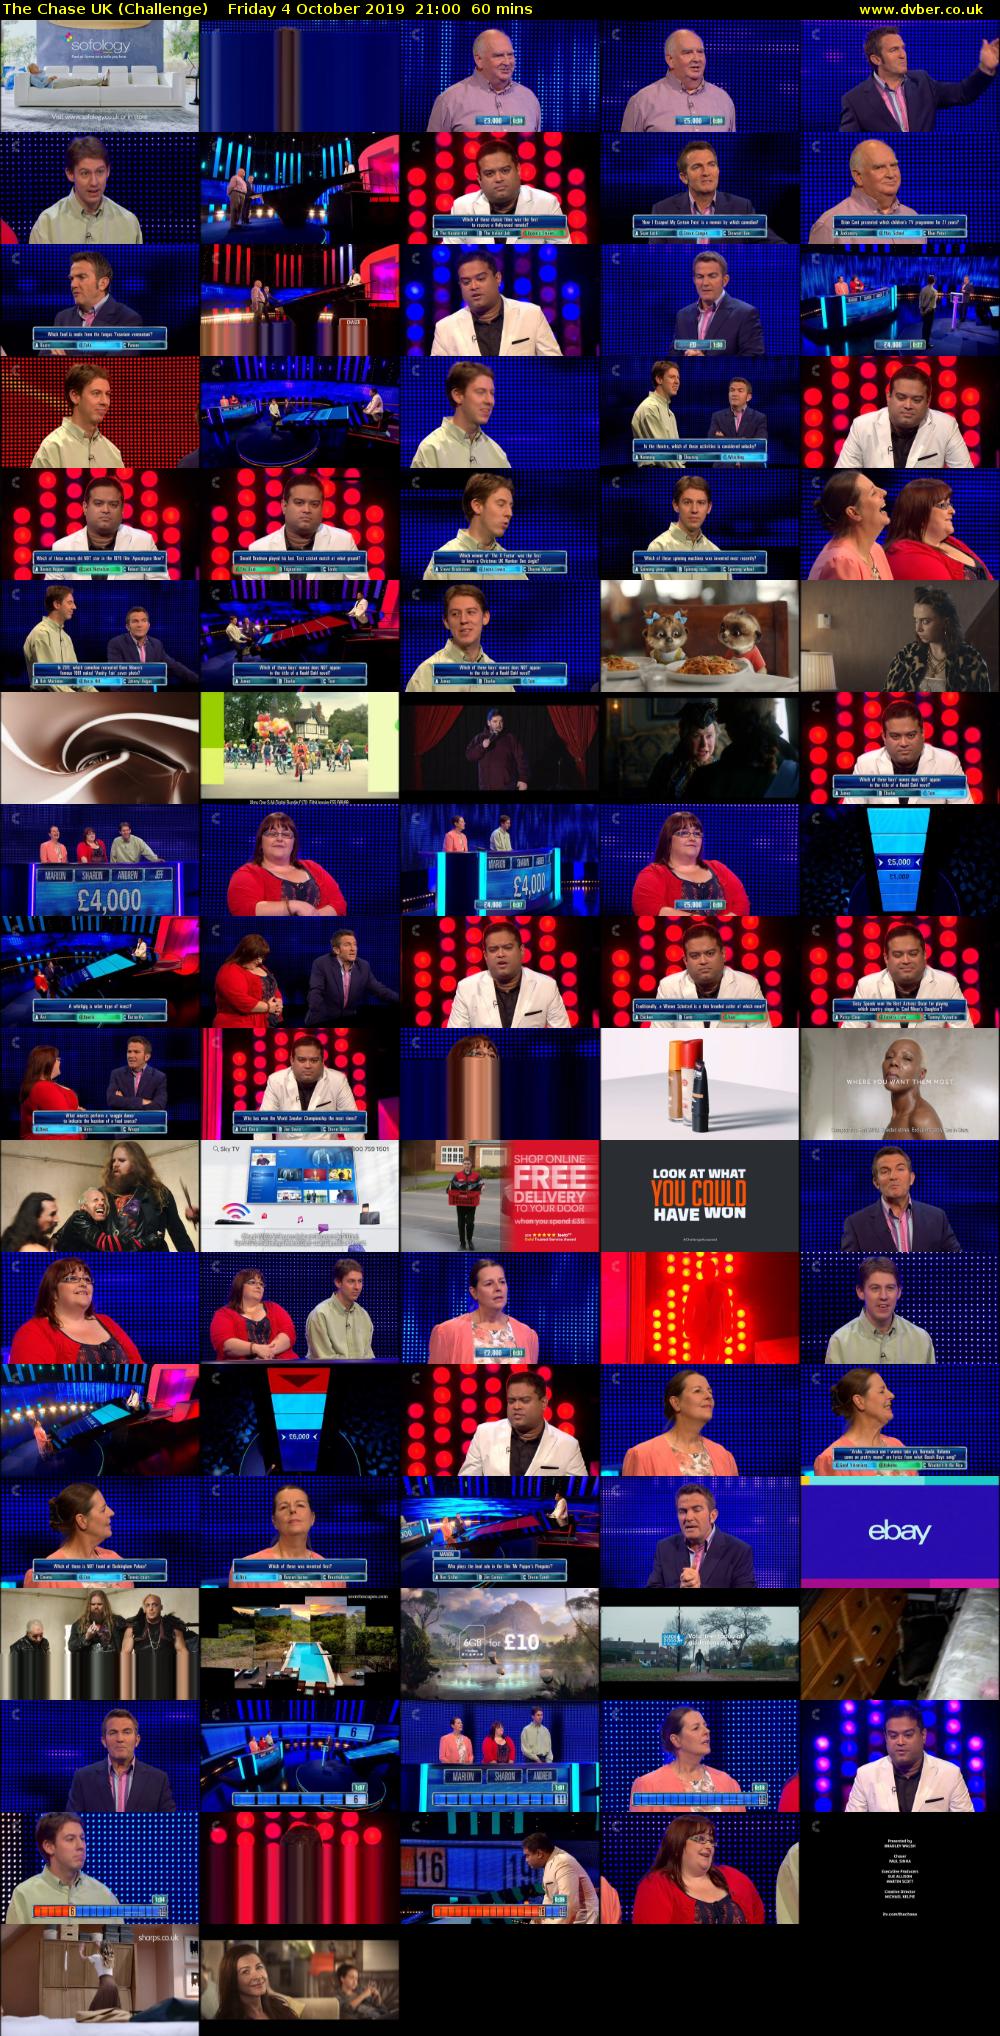 The Chase UK (Challenge) Friday 4 October 2019 21:00 - 22:00